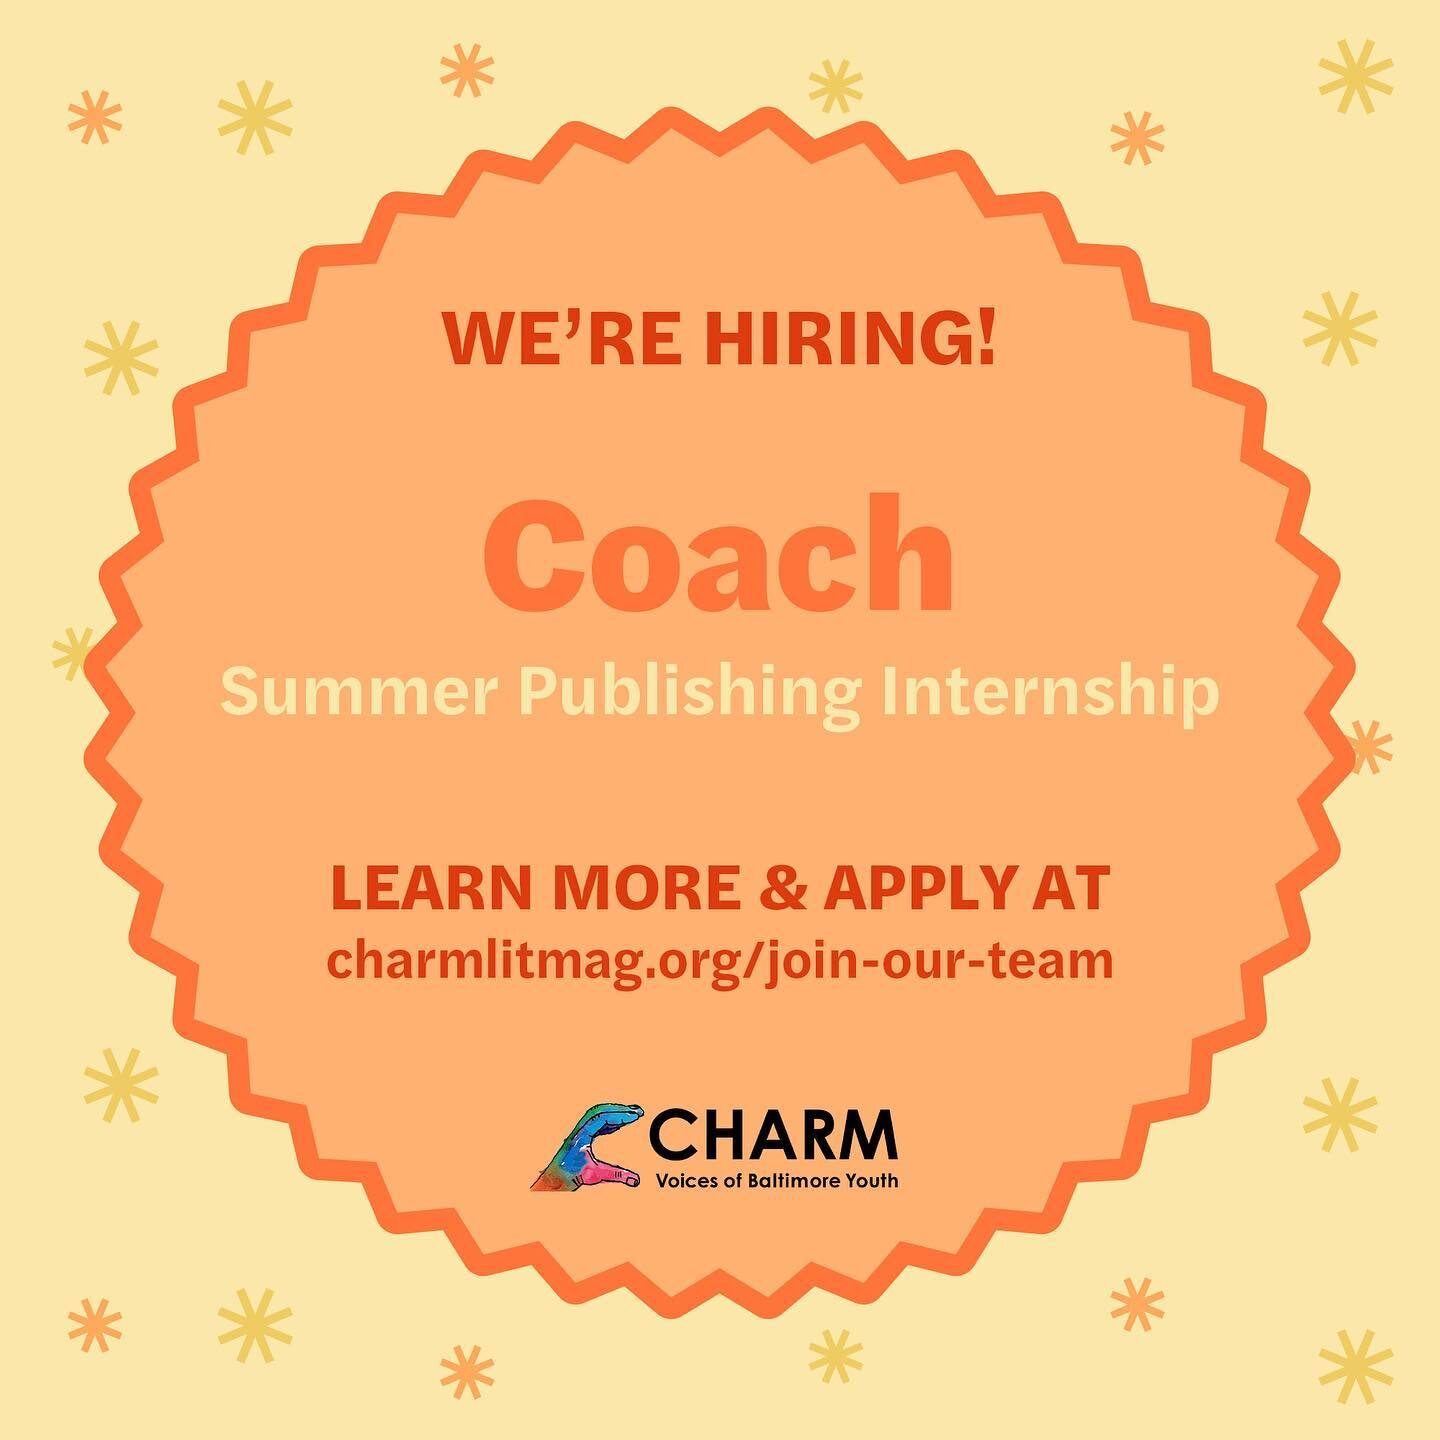 We&rsquo;re hiring for a few positions this summer! Visit www.charmlitmag.org/join-our-team to learn more! 

Job Type: 

Part Time, Summer 2023

Hybrid, 3 days/wk in-person required July/August; flexible/remote hours in June 

Reports to: Program Man